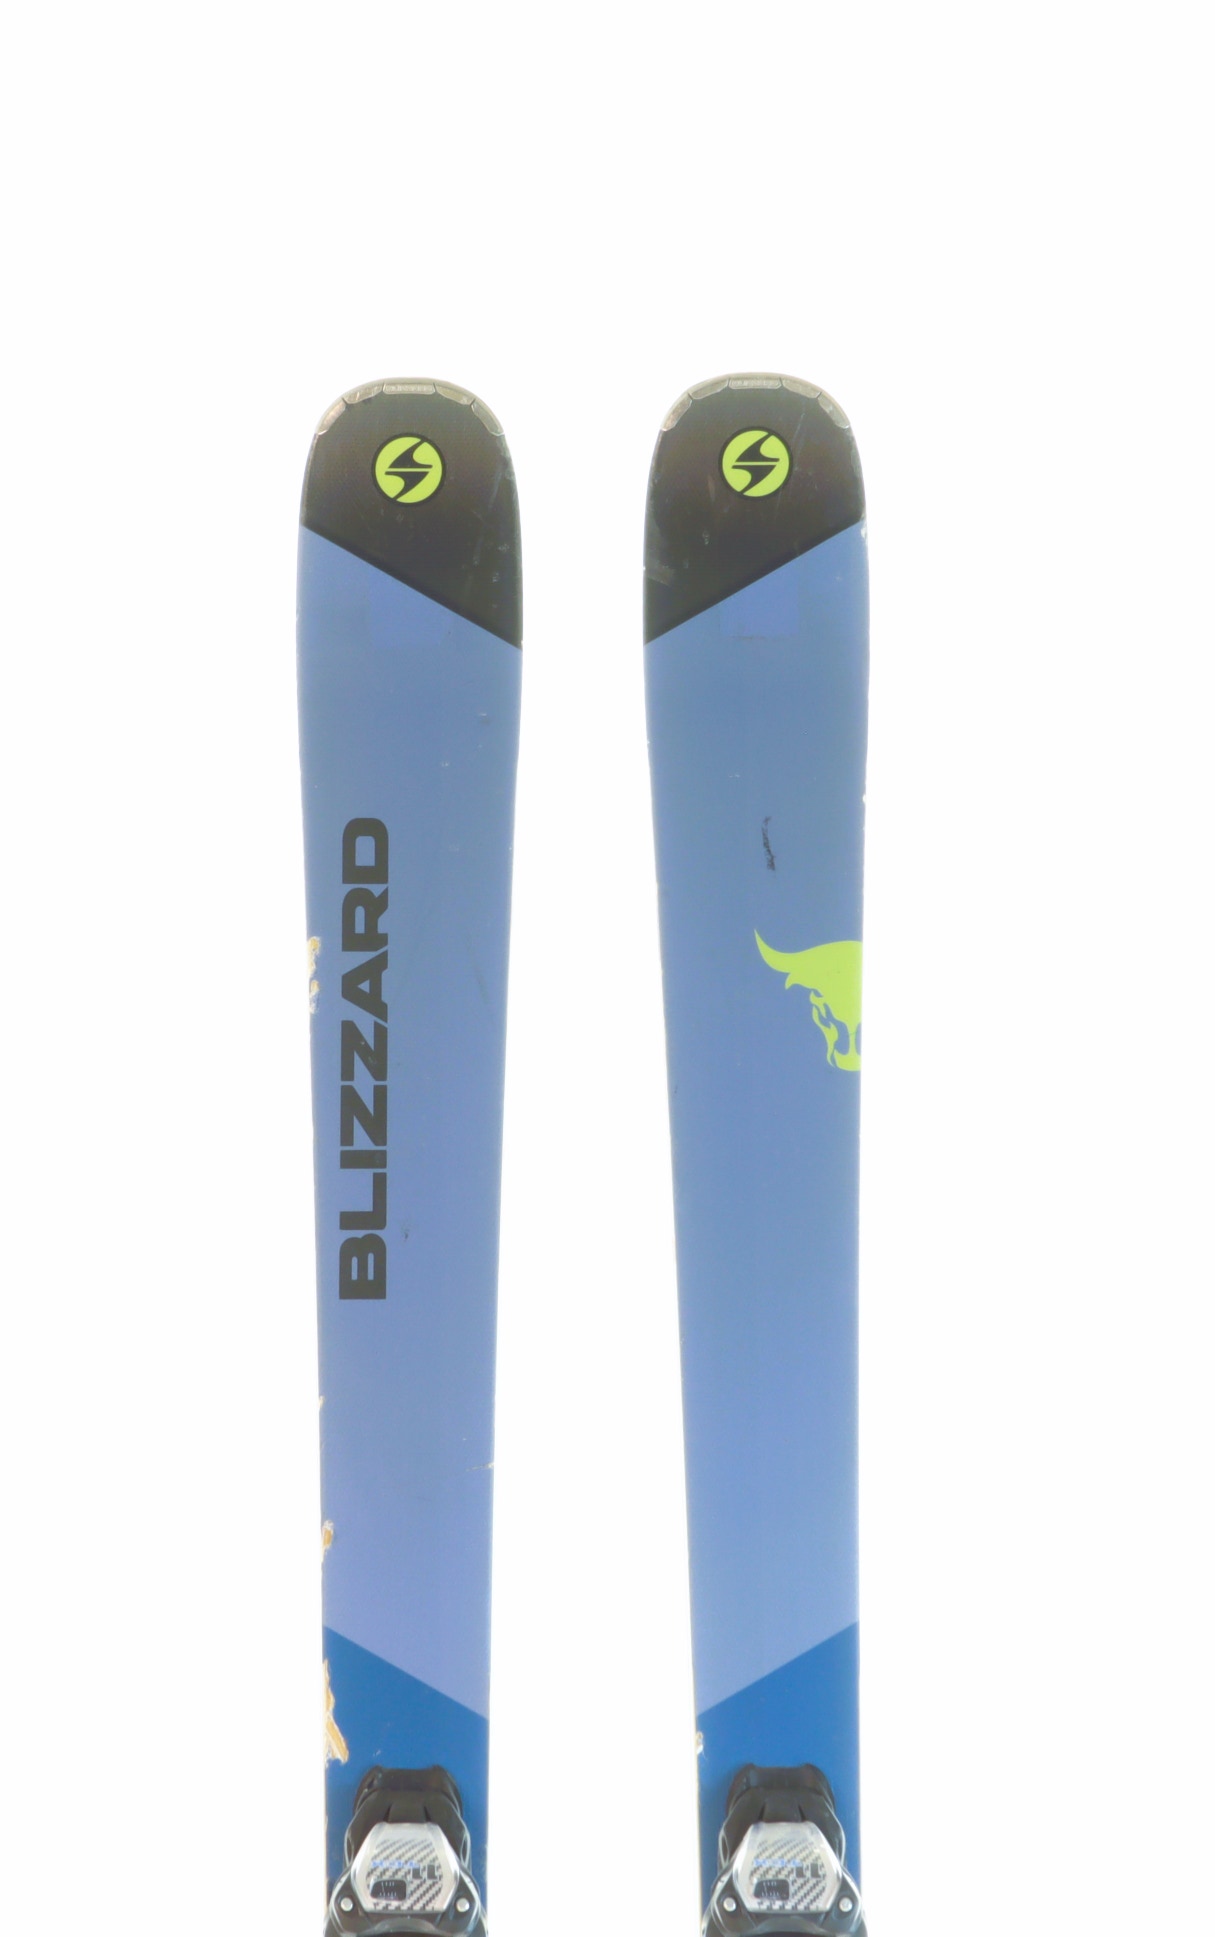 Used 2019 Blizzard Brahma SP Skis with Marker TCX 11 Bindings Size 180 (Option 230841)